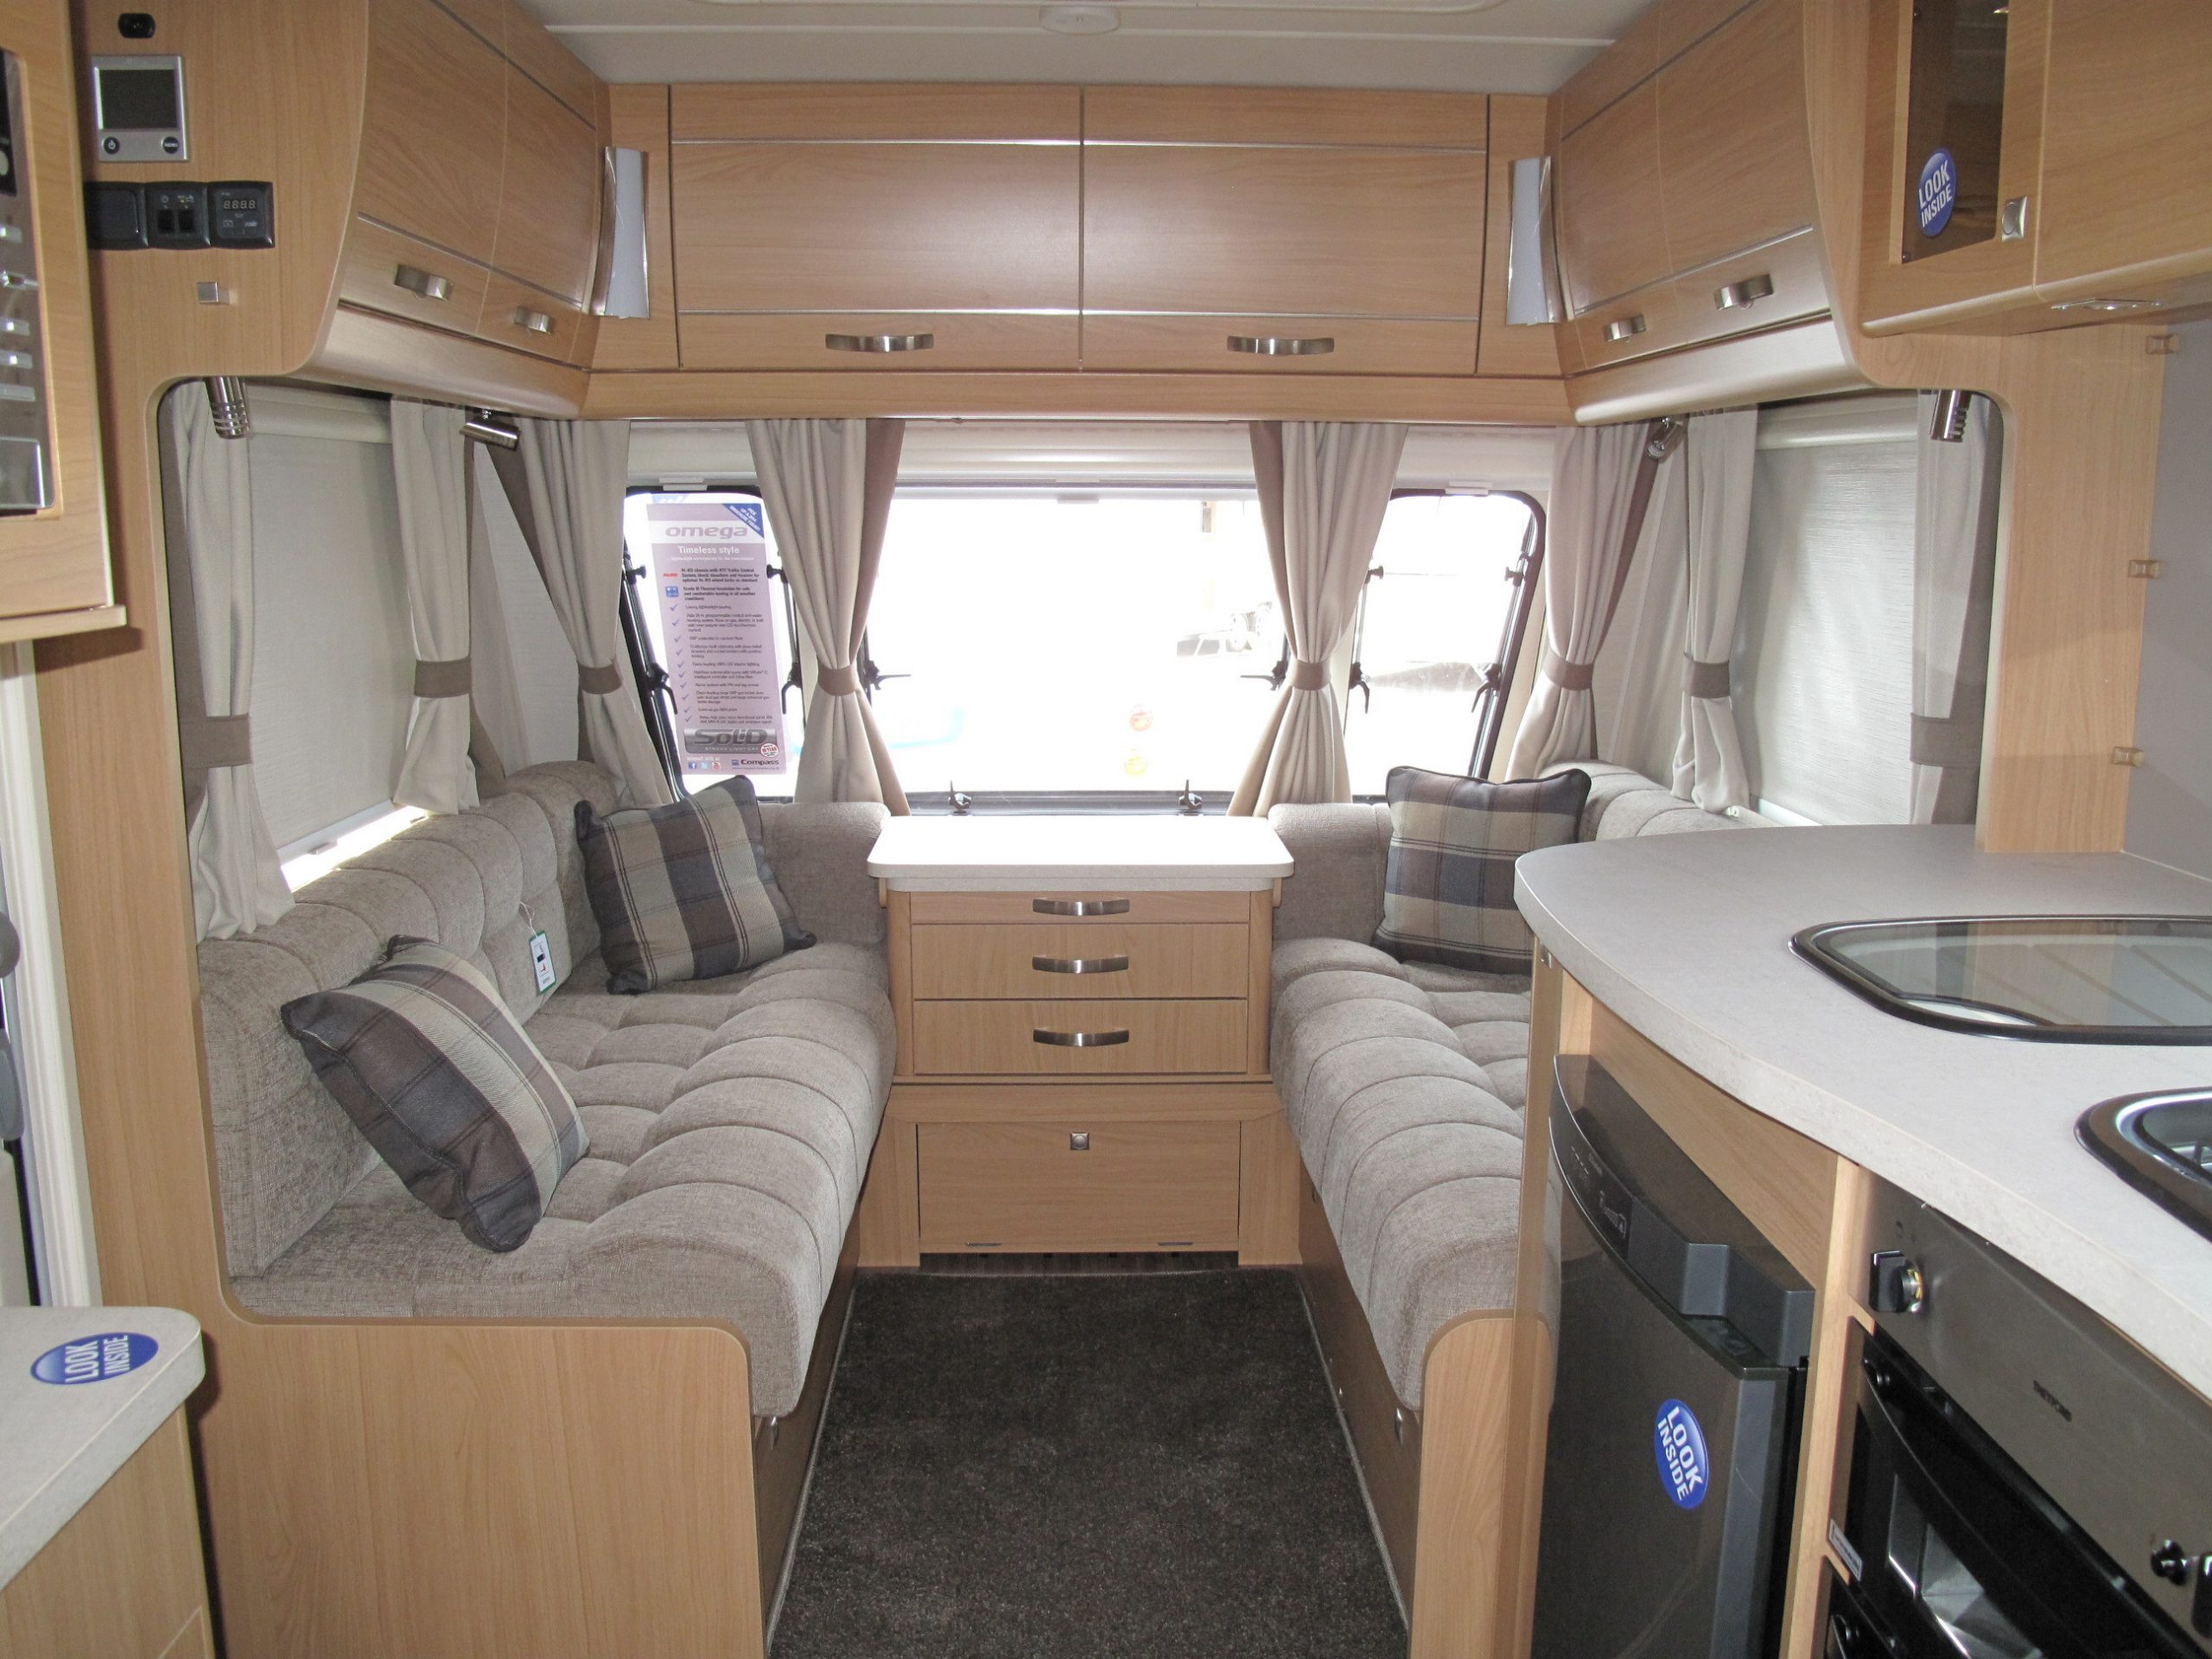 compass omega 550 for sale